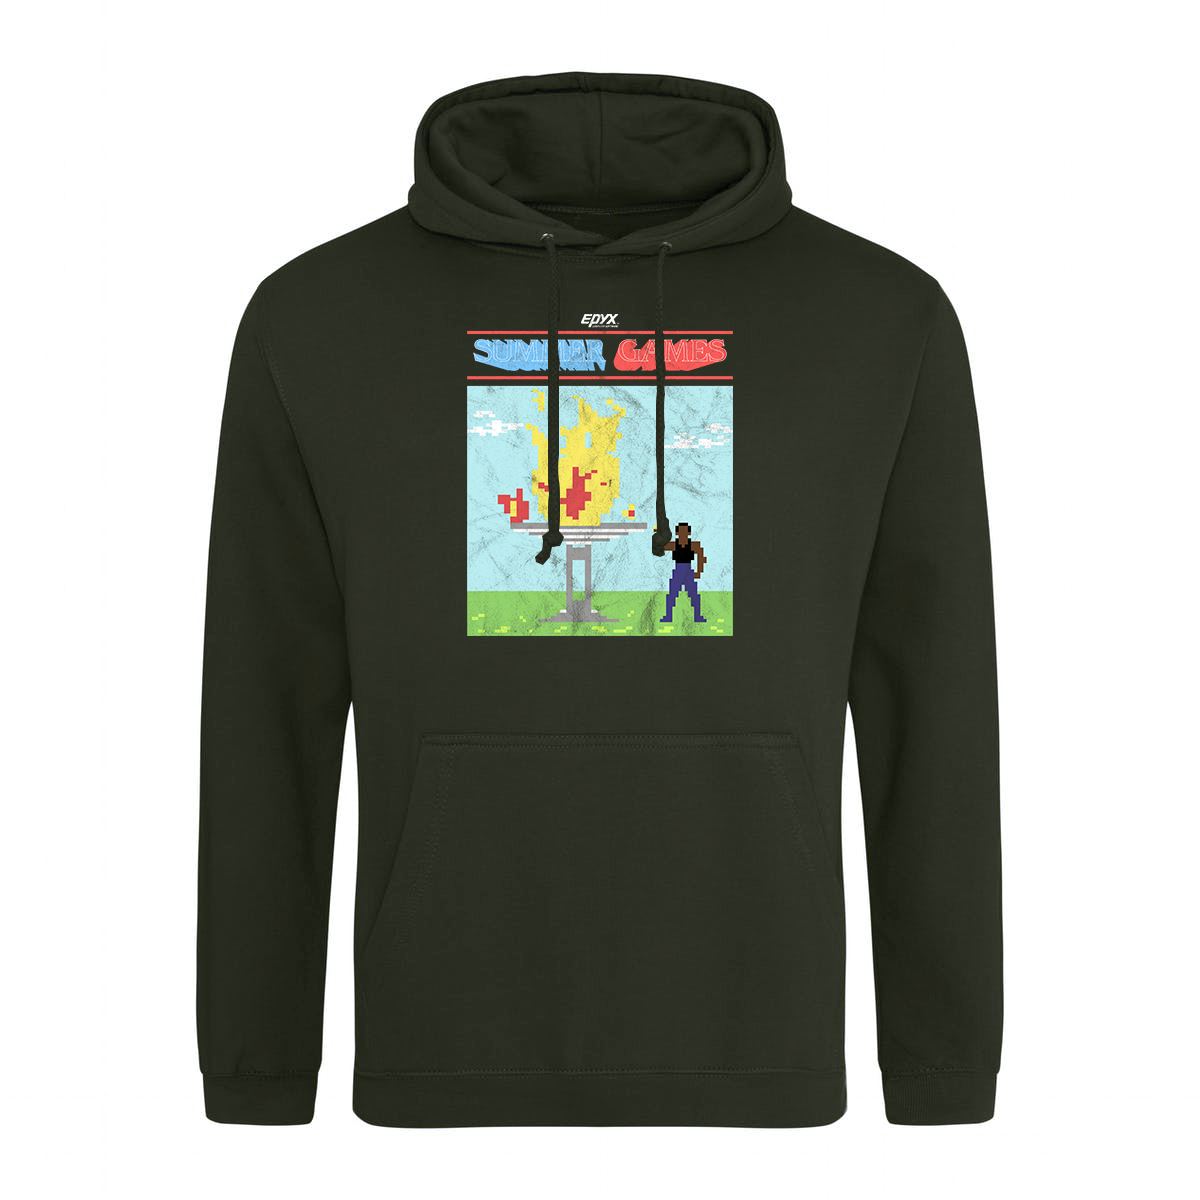 Summer Games Retro Gaming Hoodie Hoodie Seven Squared Small 36" Chest Combat Green 